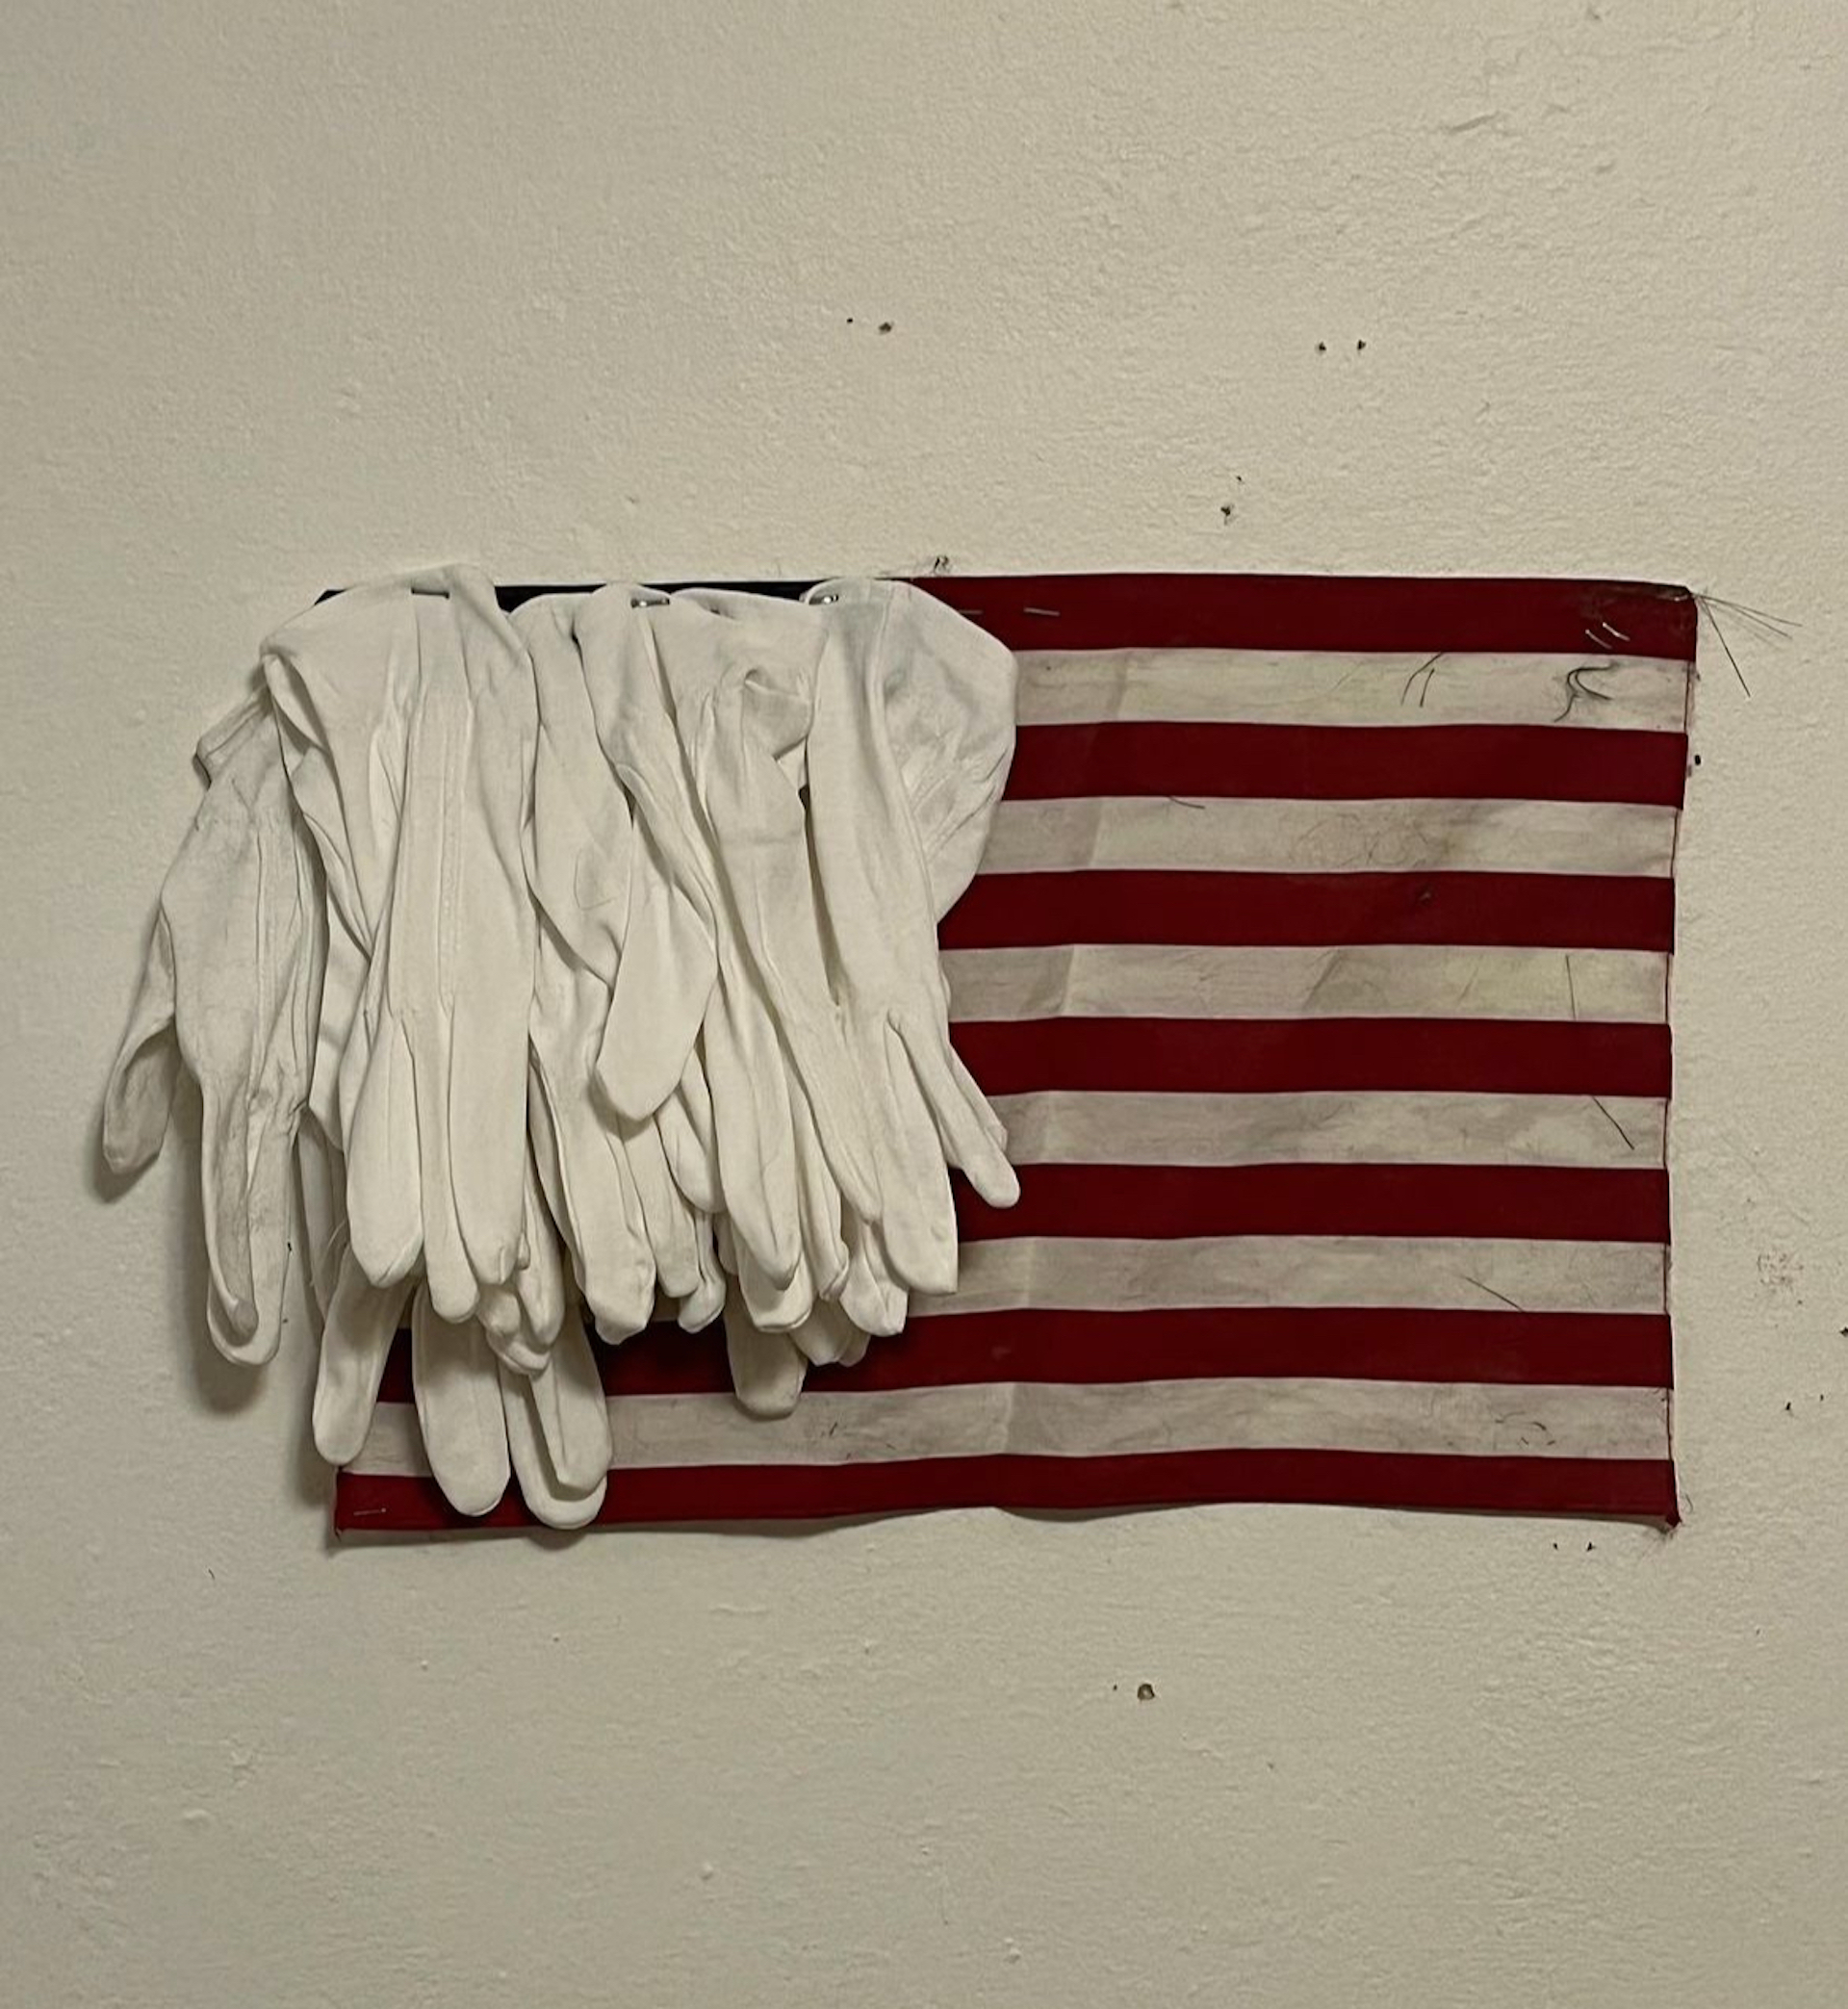 They Don't Want to See These Hands, American Flag, White cloth gloves, 10x16in, 2022